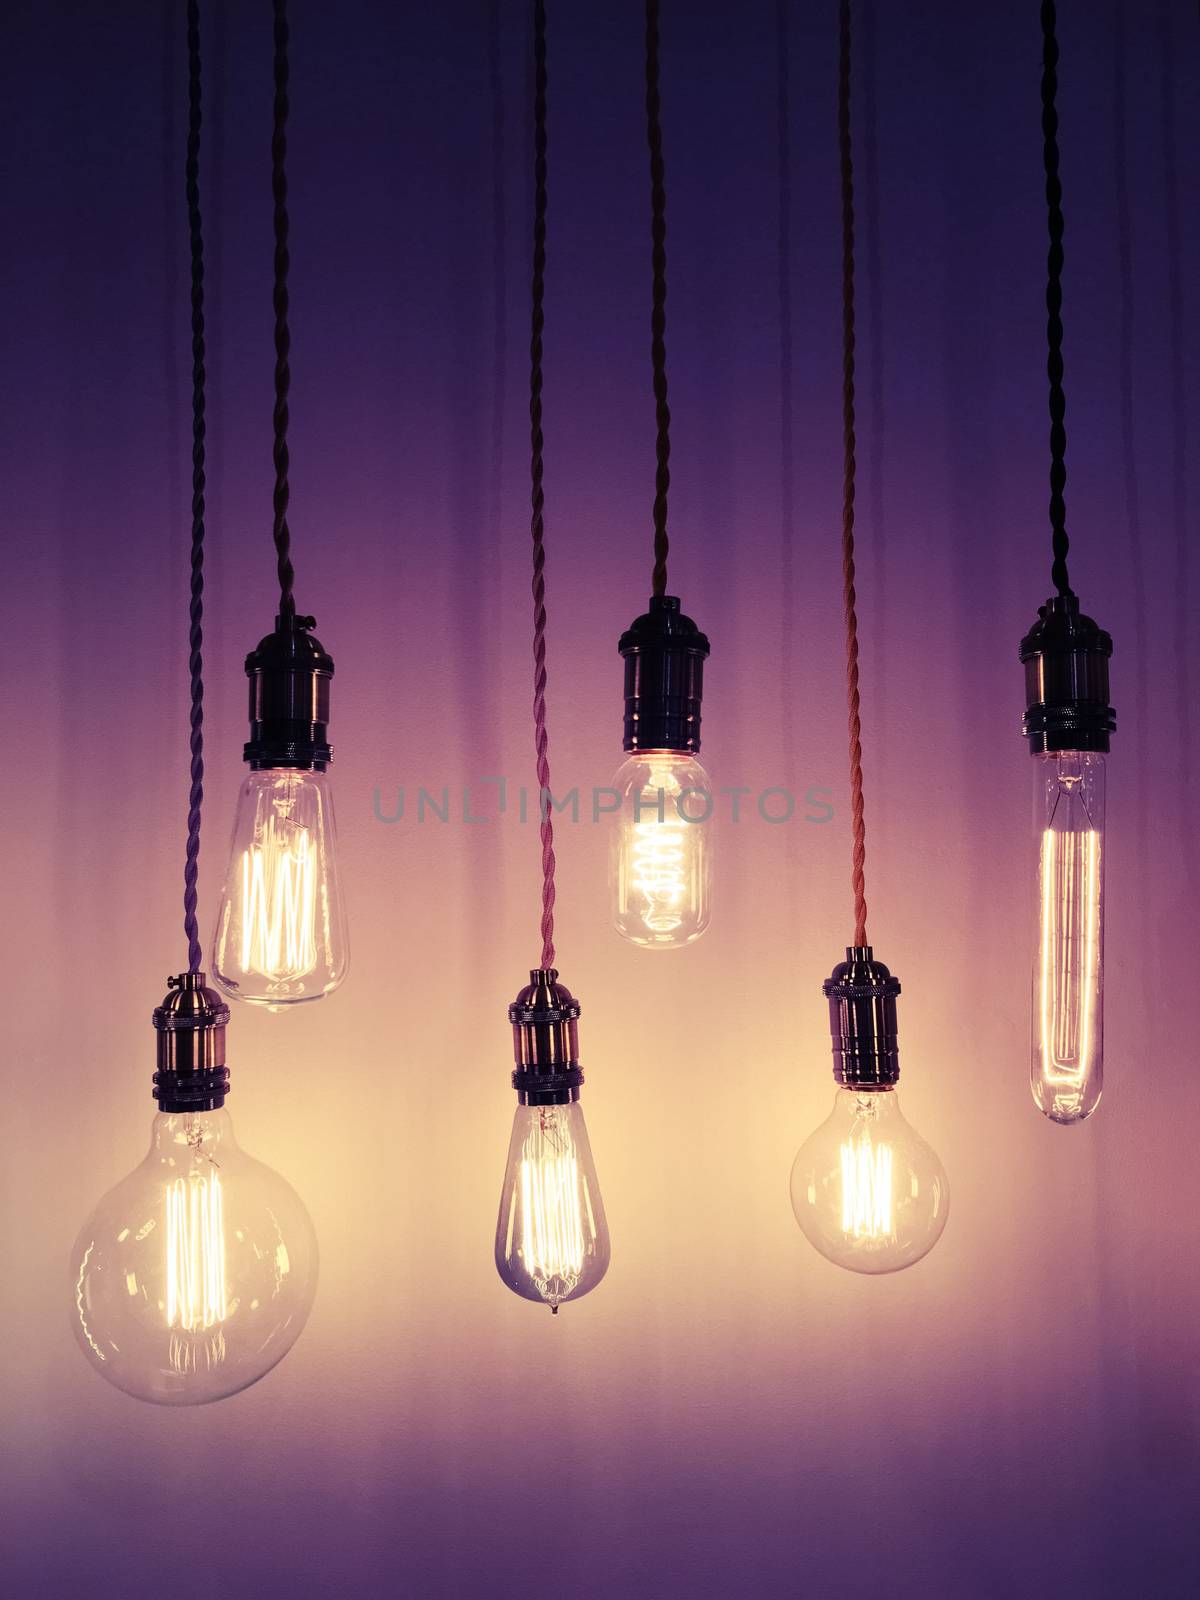 Industrial style light bulbs on purple background. Modern design with retro feel.